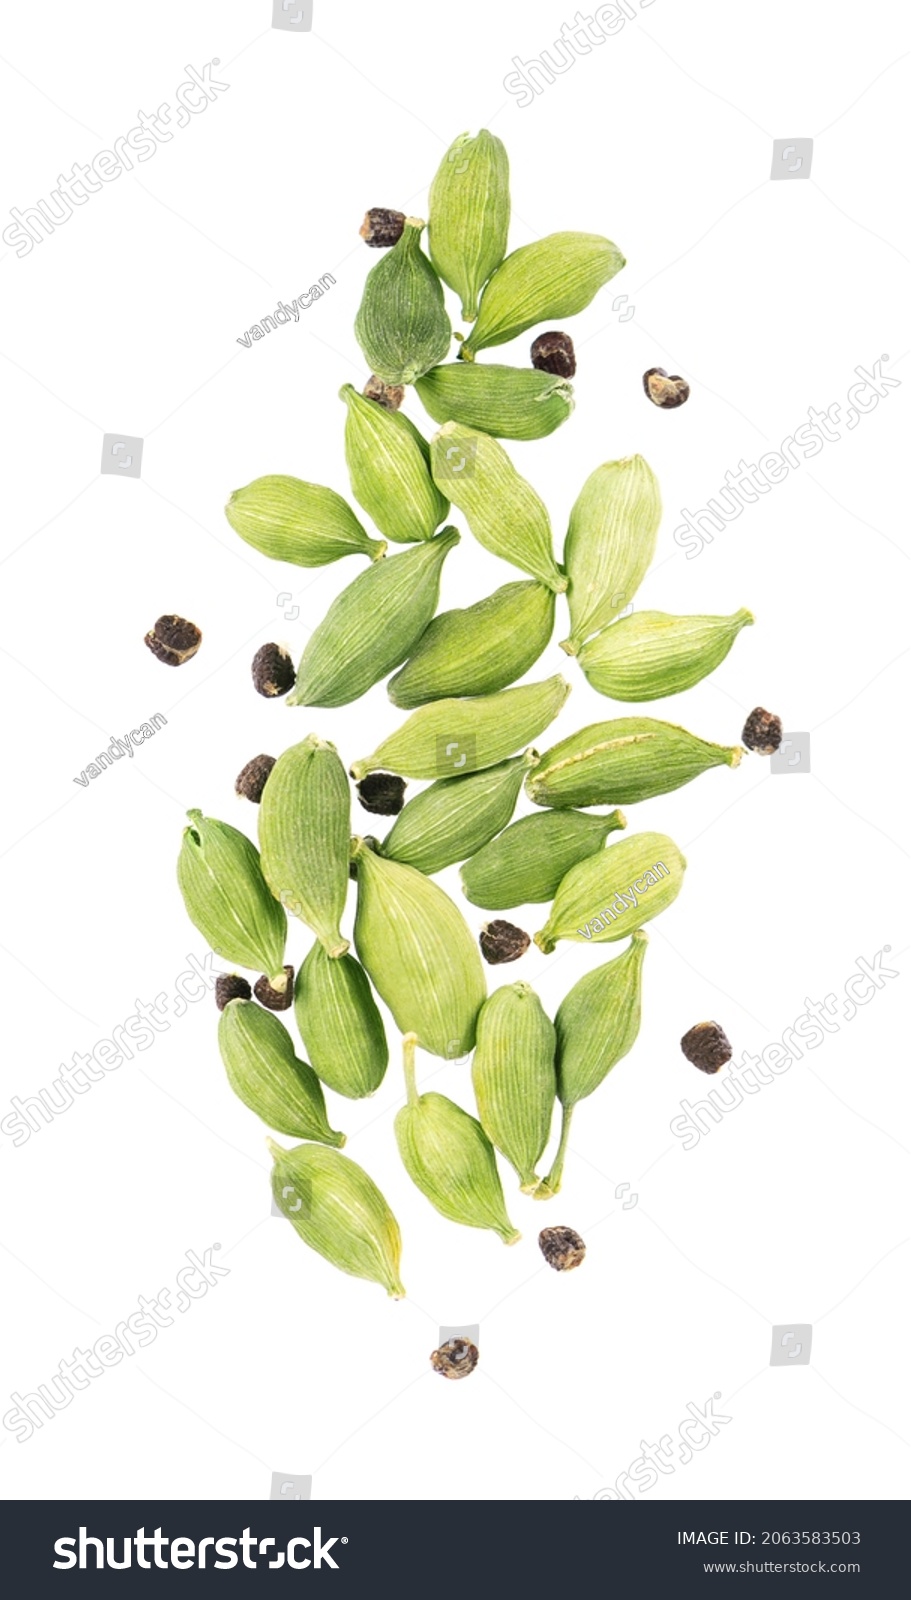 Cardamom pods isolated on white background. Green cardamon seeds. Clipping path. Top view. #2063583503